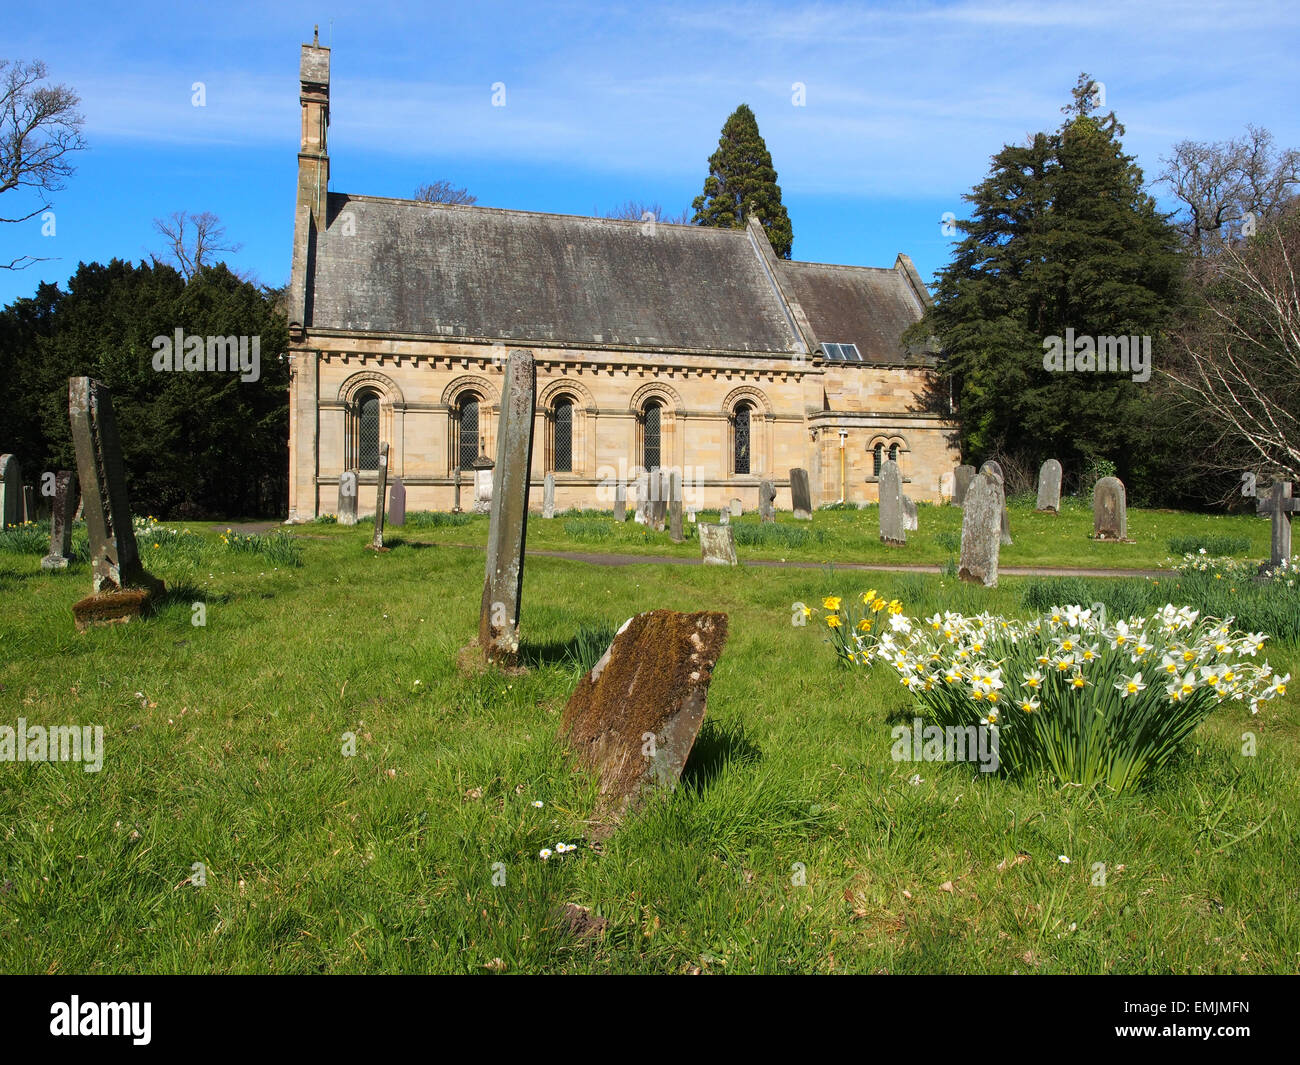 Church and graveyard in the gardens of Howick Hall, Northumberland, England. Stock Photo